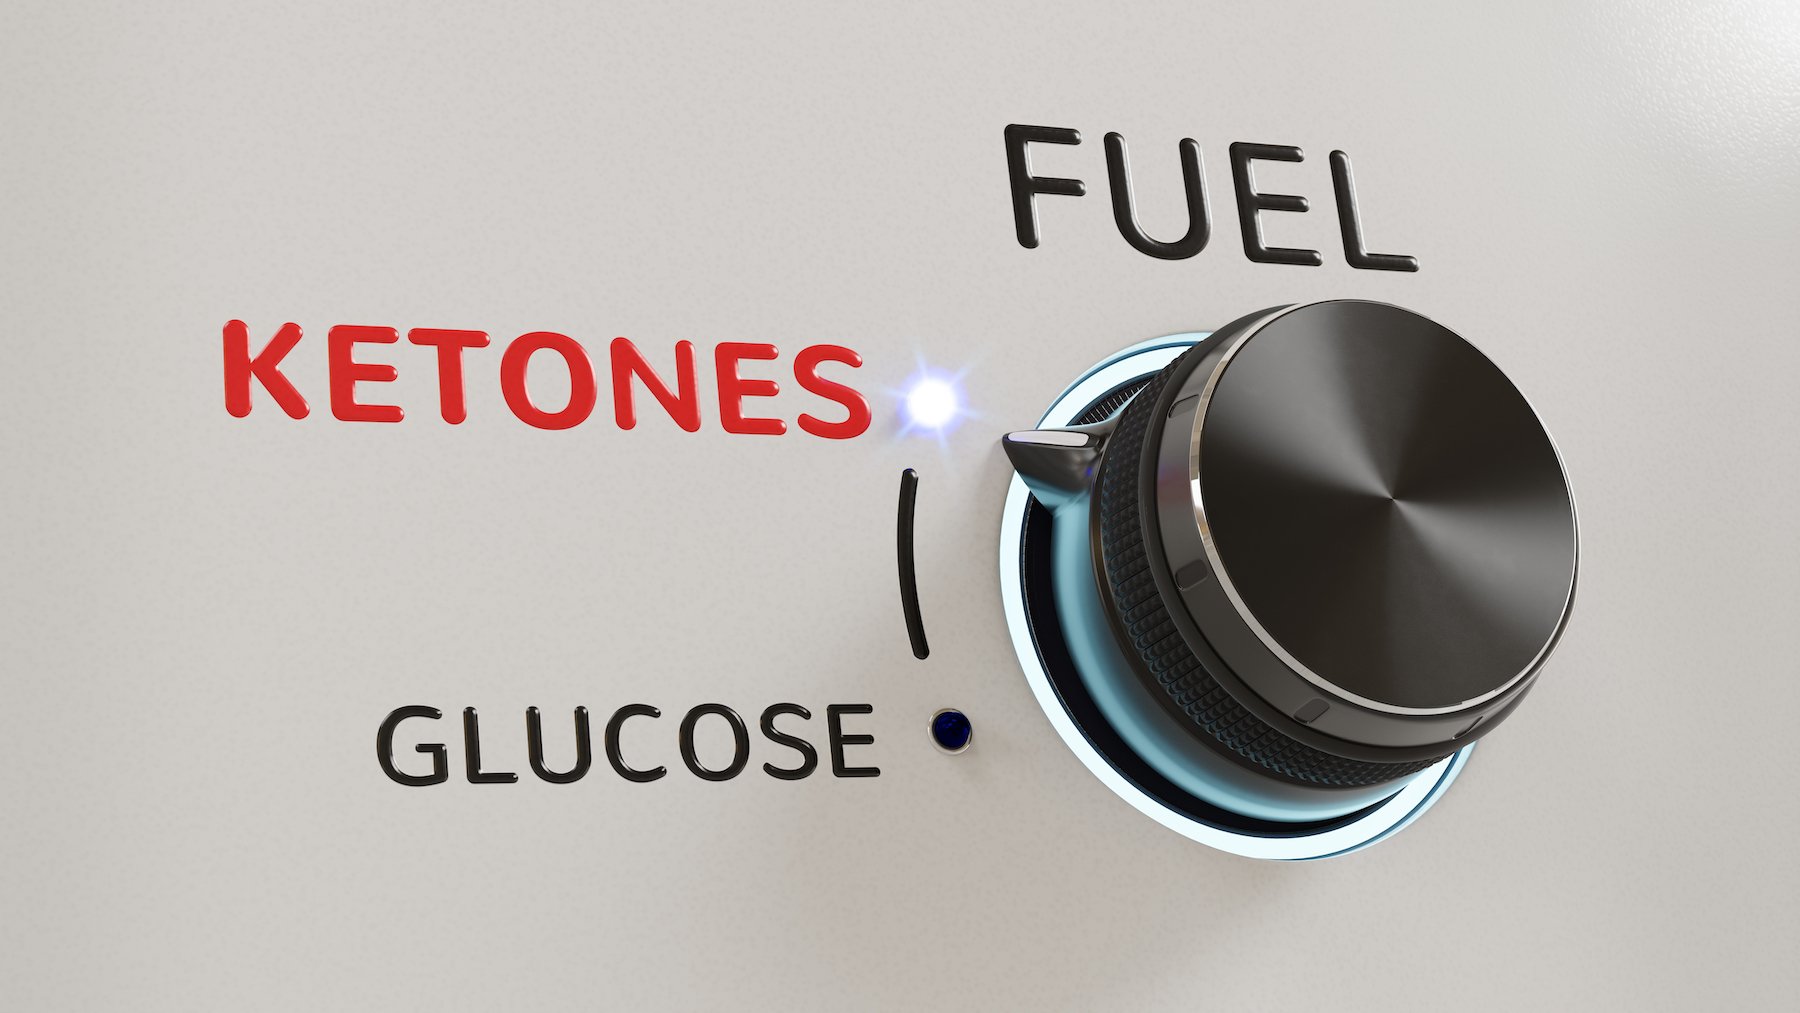 How monitoring ketones and glucose can help you achieve metabolic flexibility